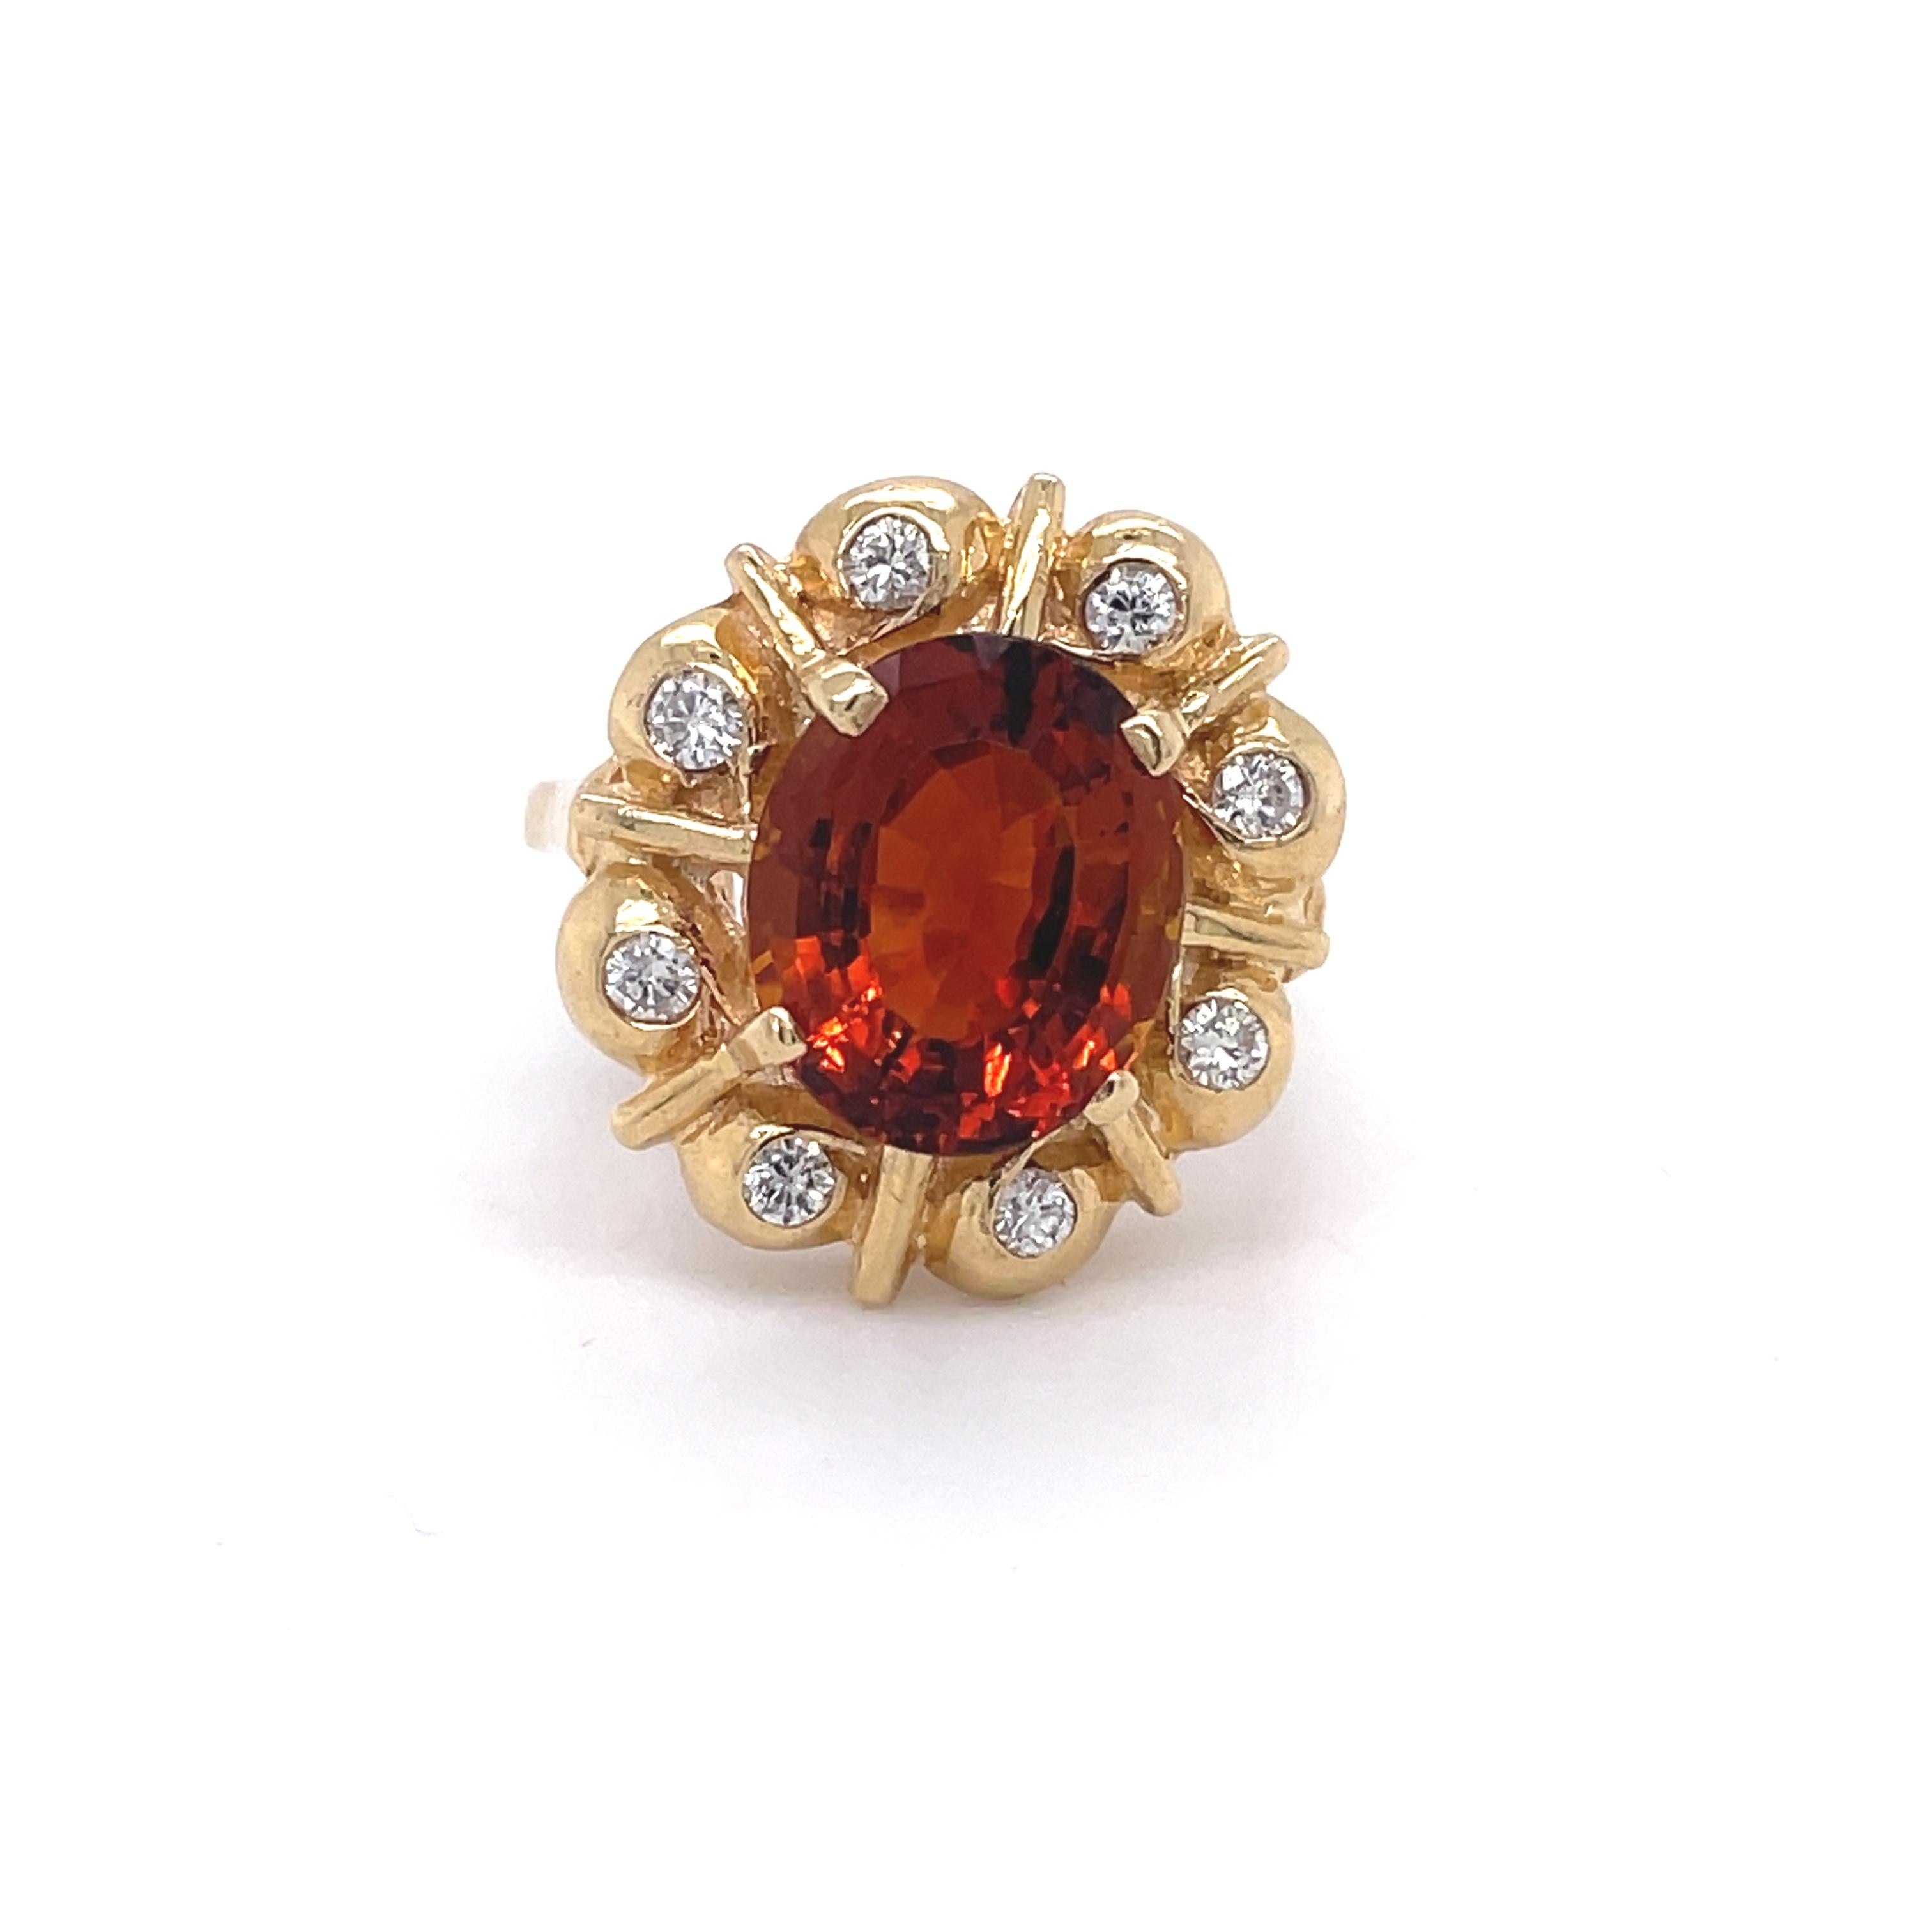 Victorian Topaz and Diamond Vintage Ring 5 Ct Oval Topaz, 10k Yellow Gold, Cocktail Ring For Sale